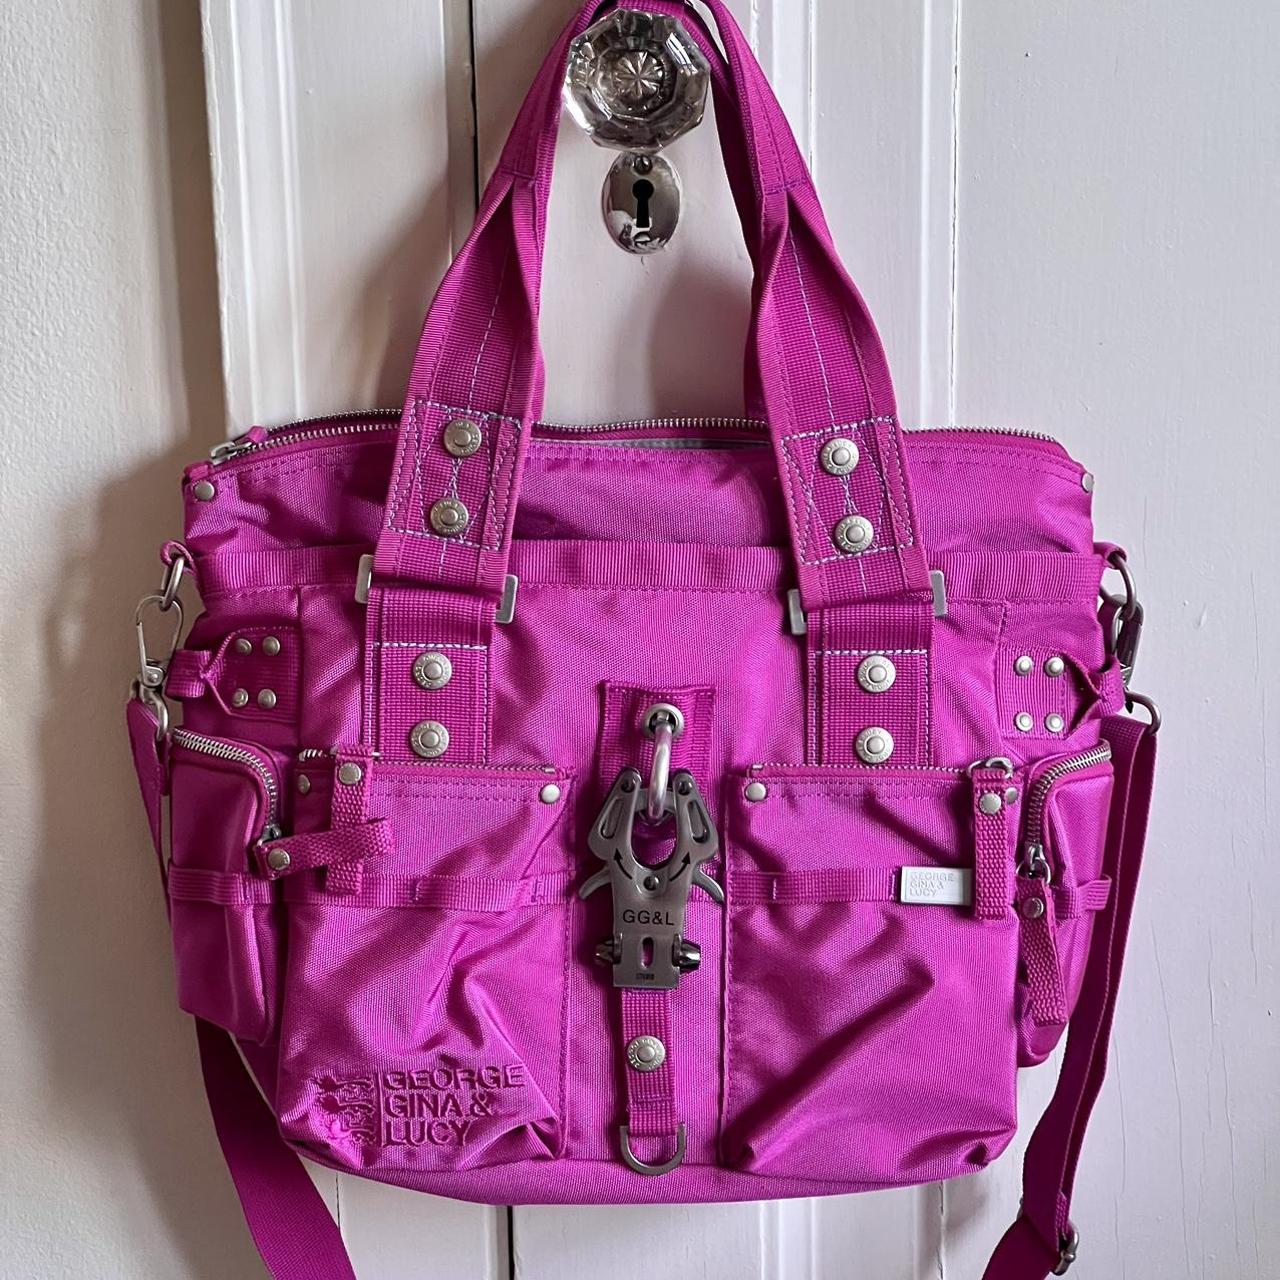 George Gina & Lucy all pink purse! love this, I... - Depop